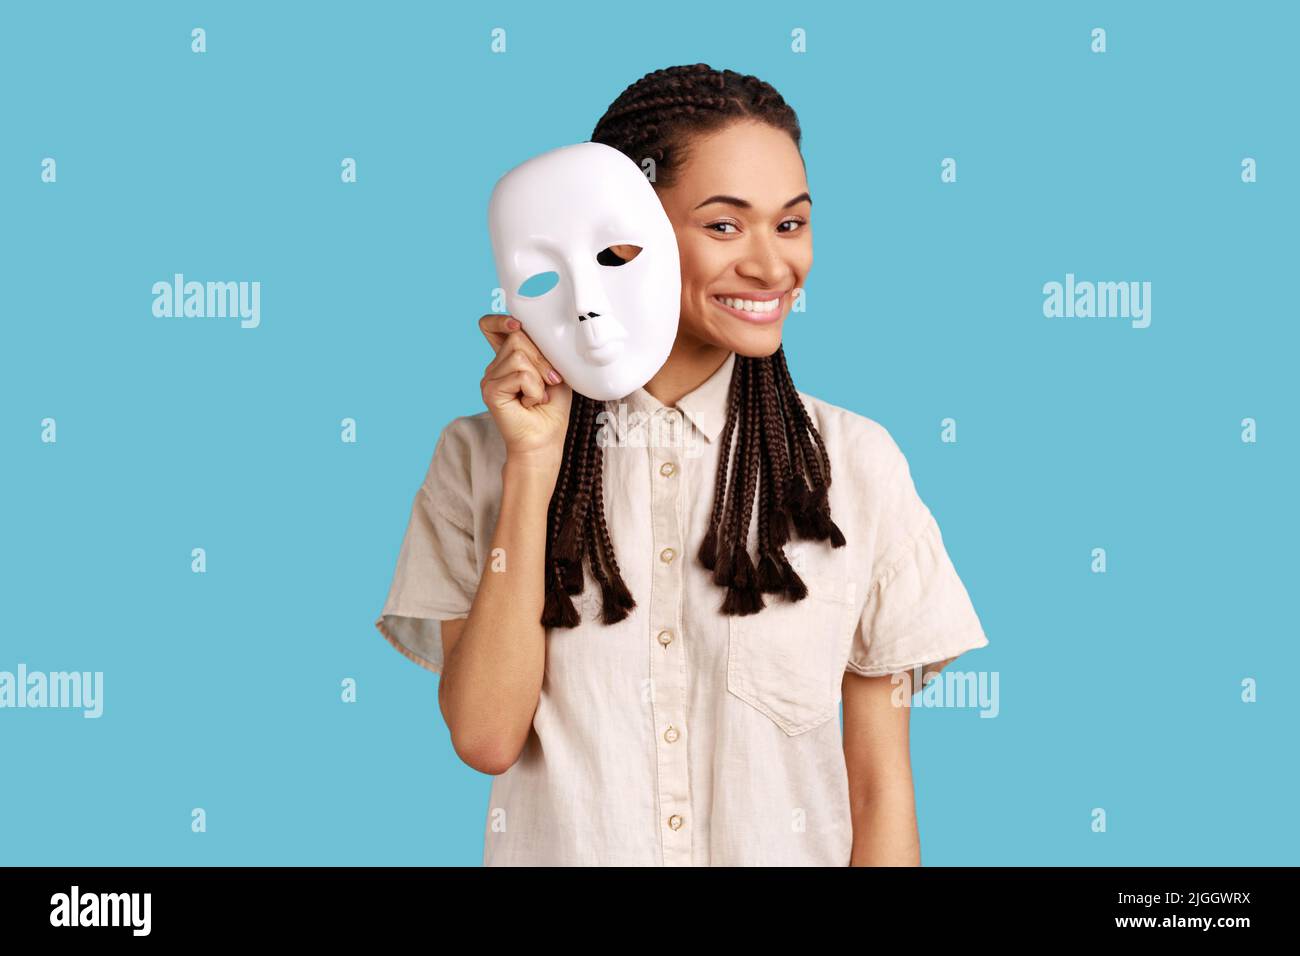 Woman with dreadlocks removing white mask from face showing his smiling expression, good mood, pretending to be another person, wearing white shirt. Indoor studio shot isolated on blue background. Stock Photo